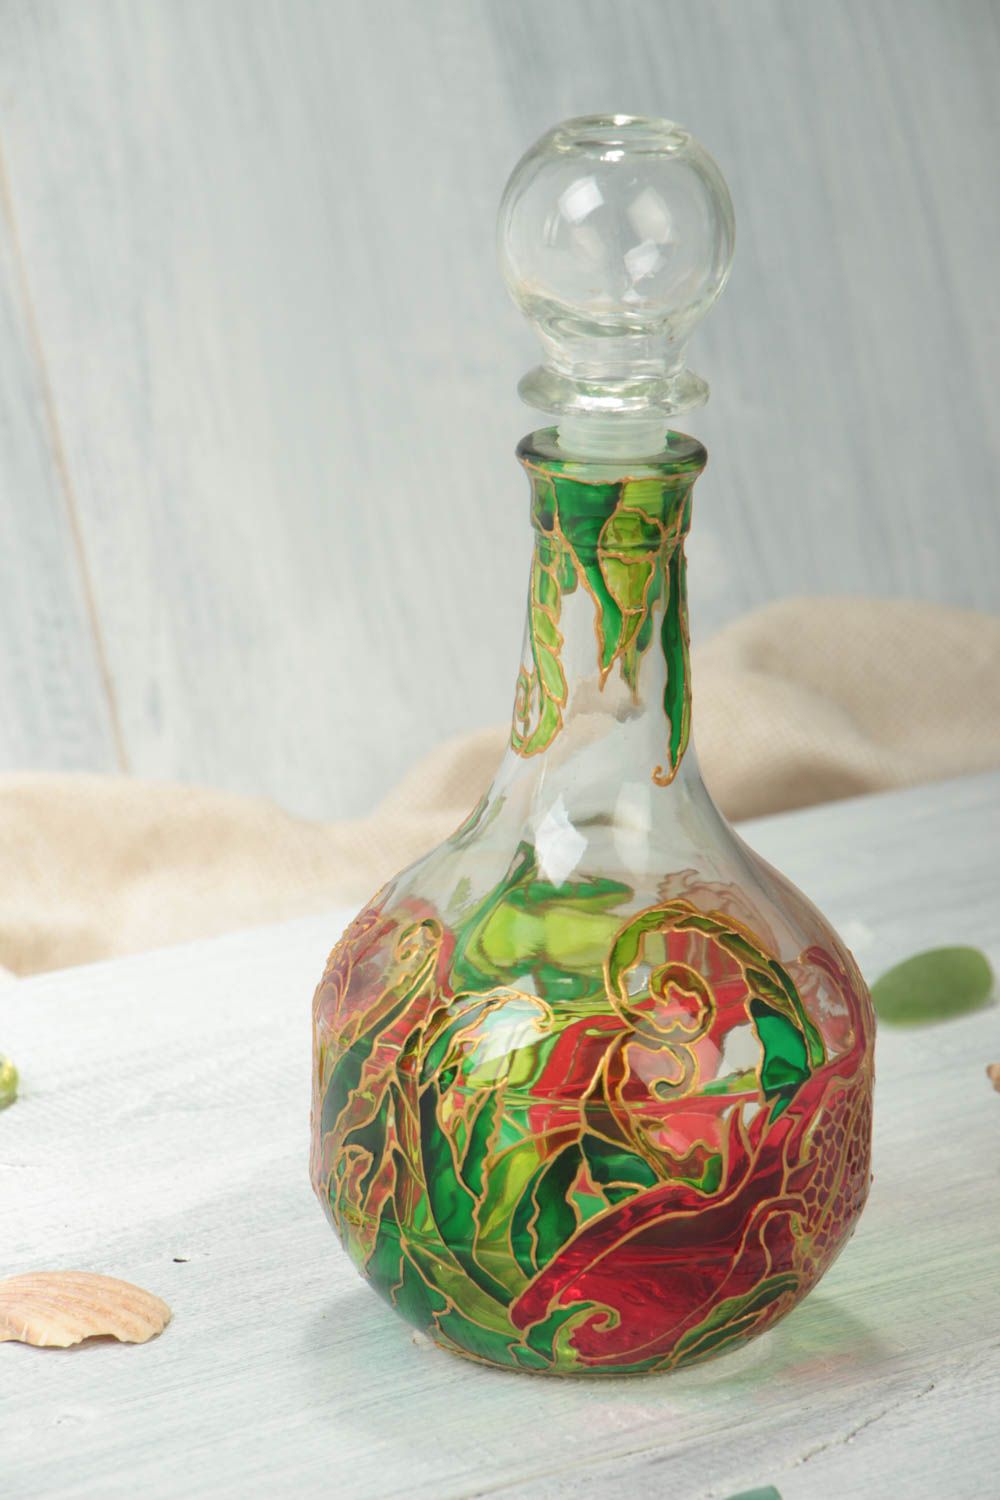 15 oz clear glass wine carafe with hand-painted floral pattern 1 lb photo 1